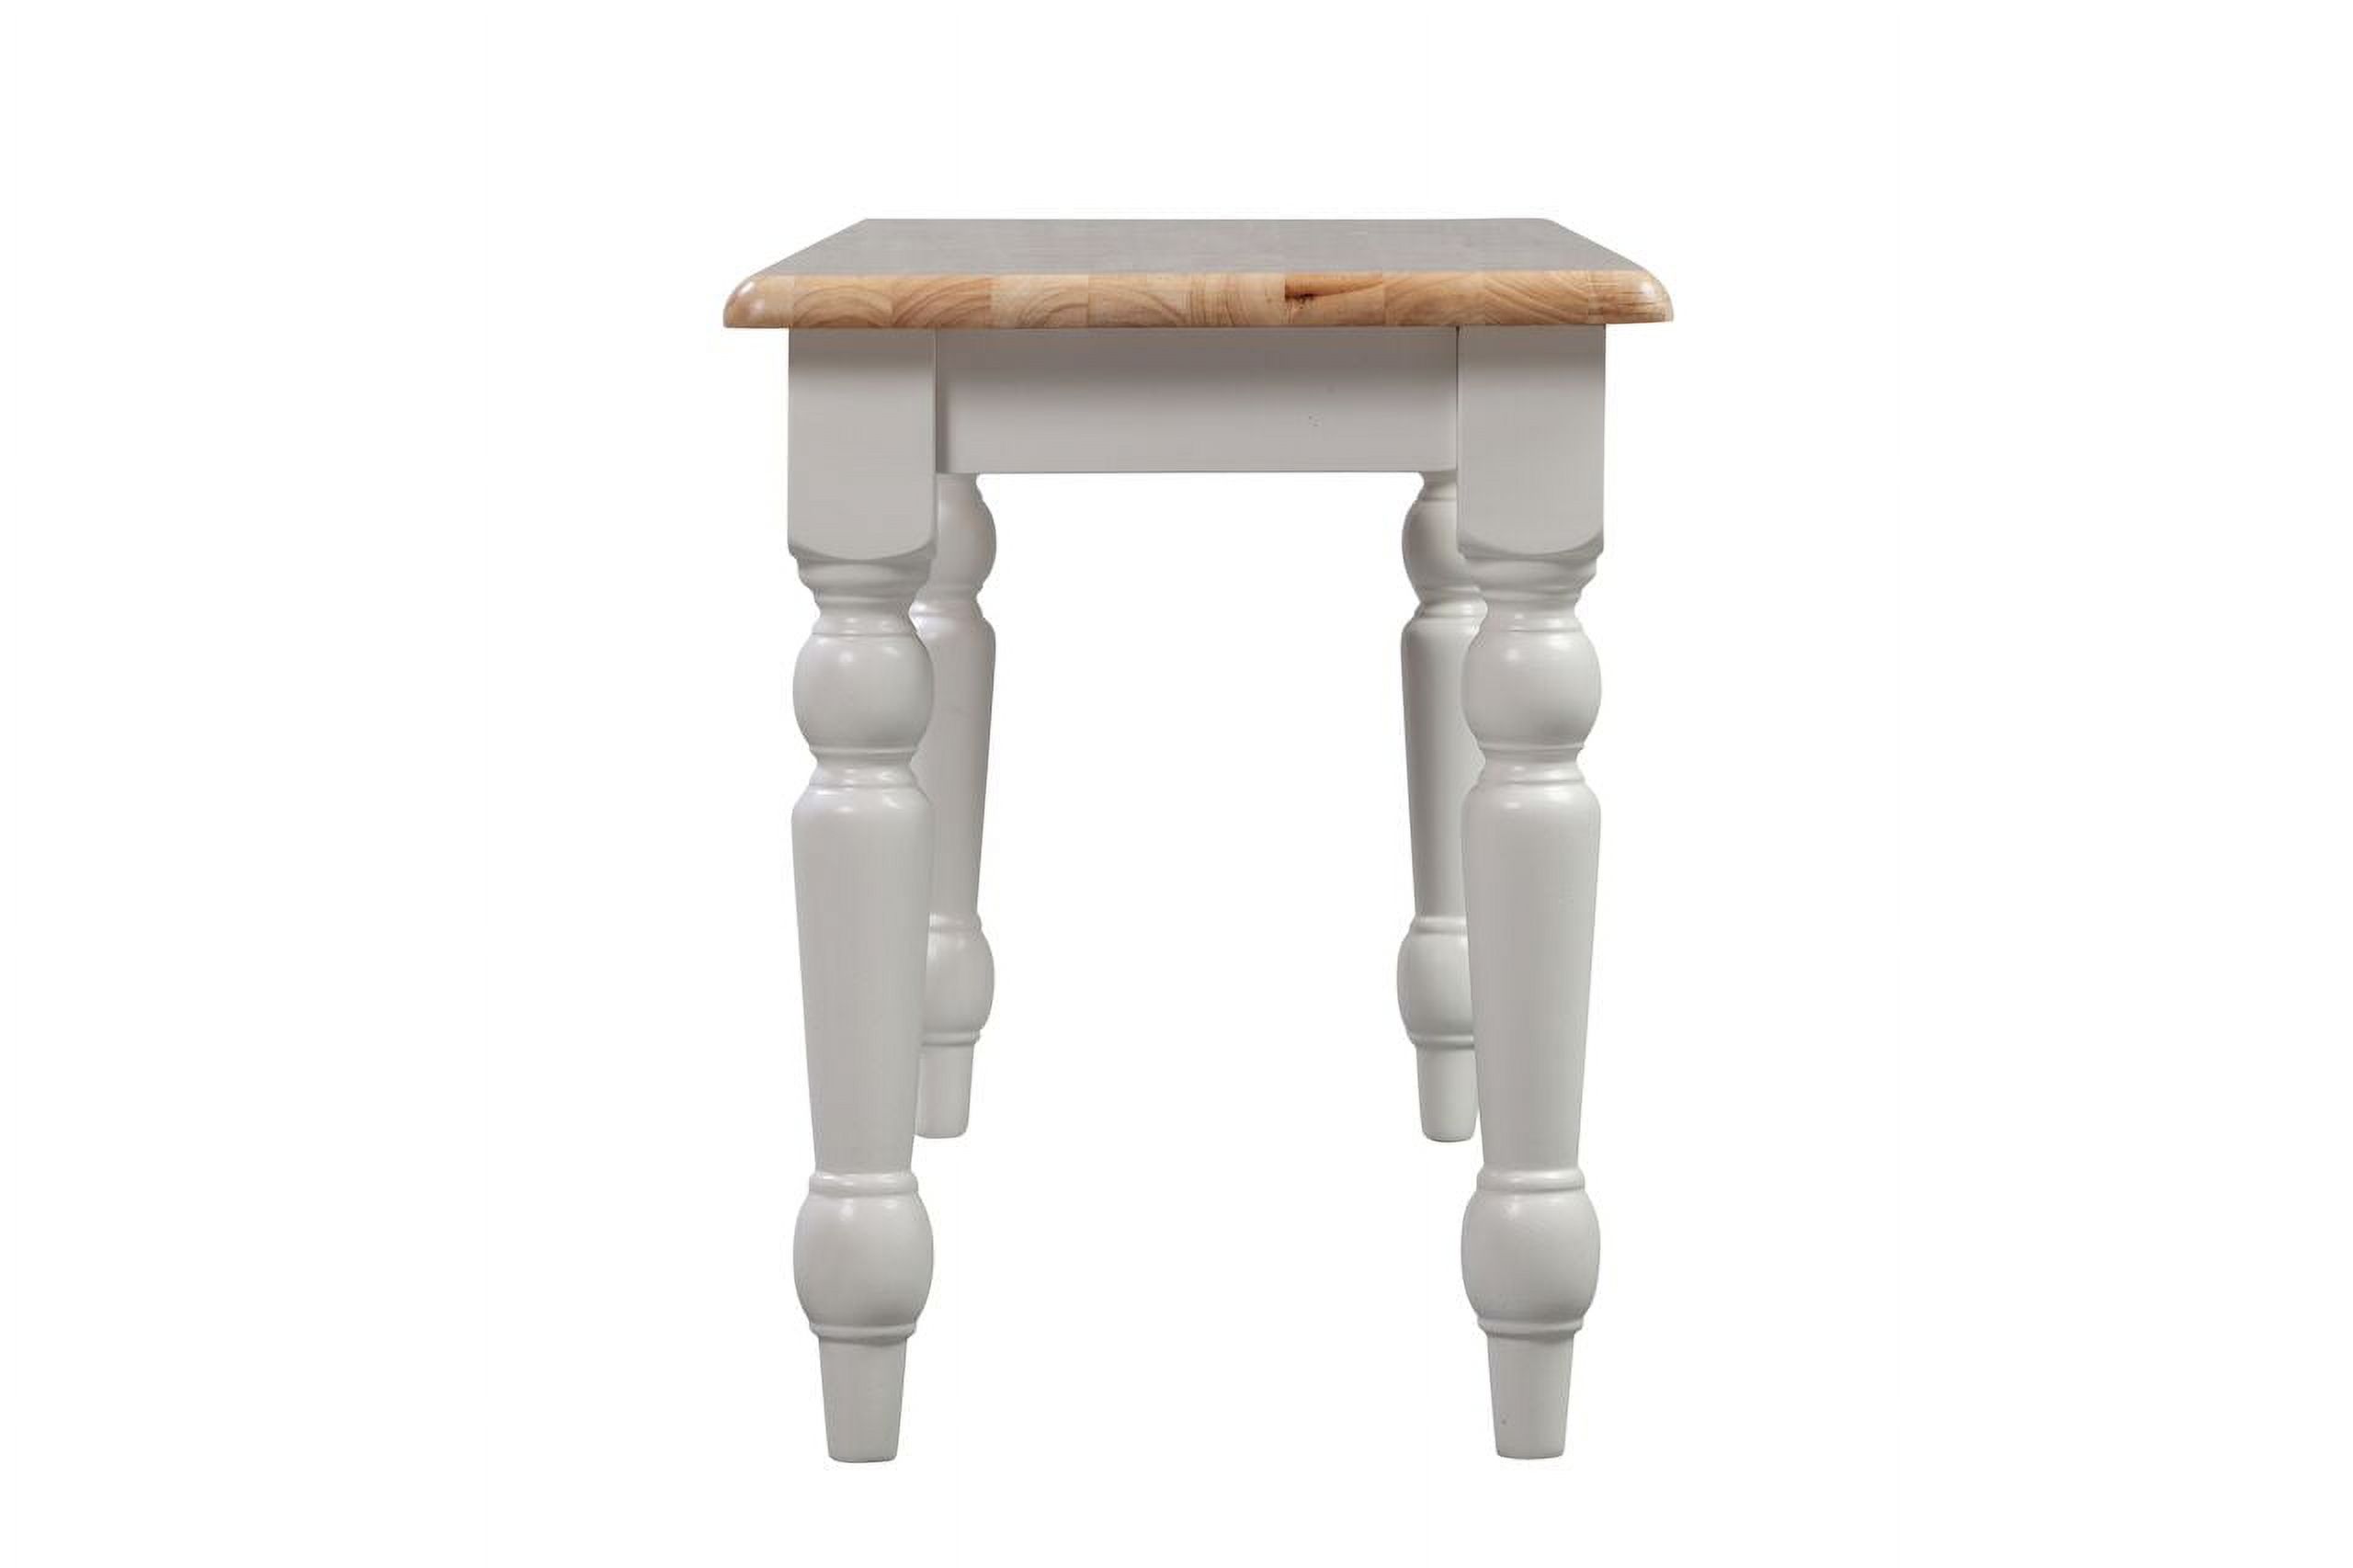 Boraam Farmhouse Backless Wood Bench - White/Natural Two-Tone Finish - image 3 of 5